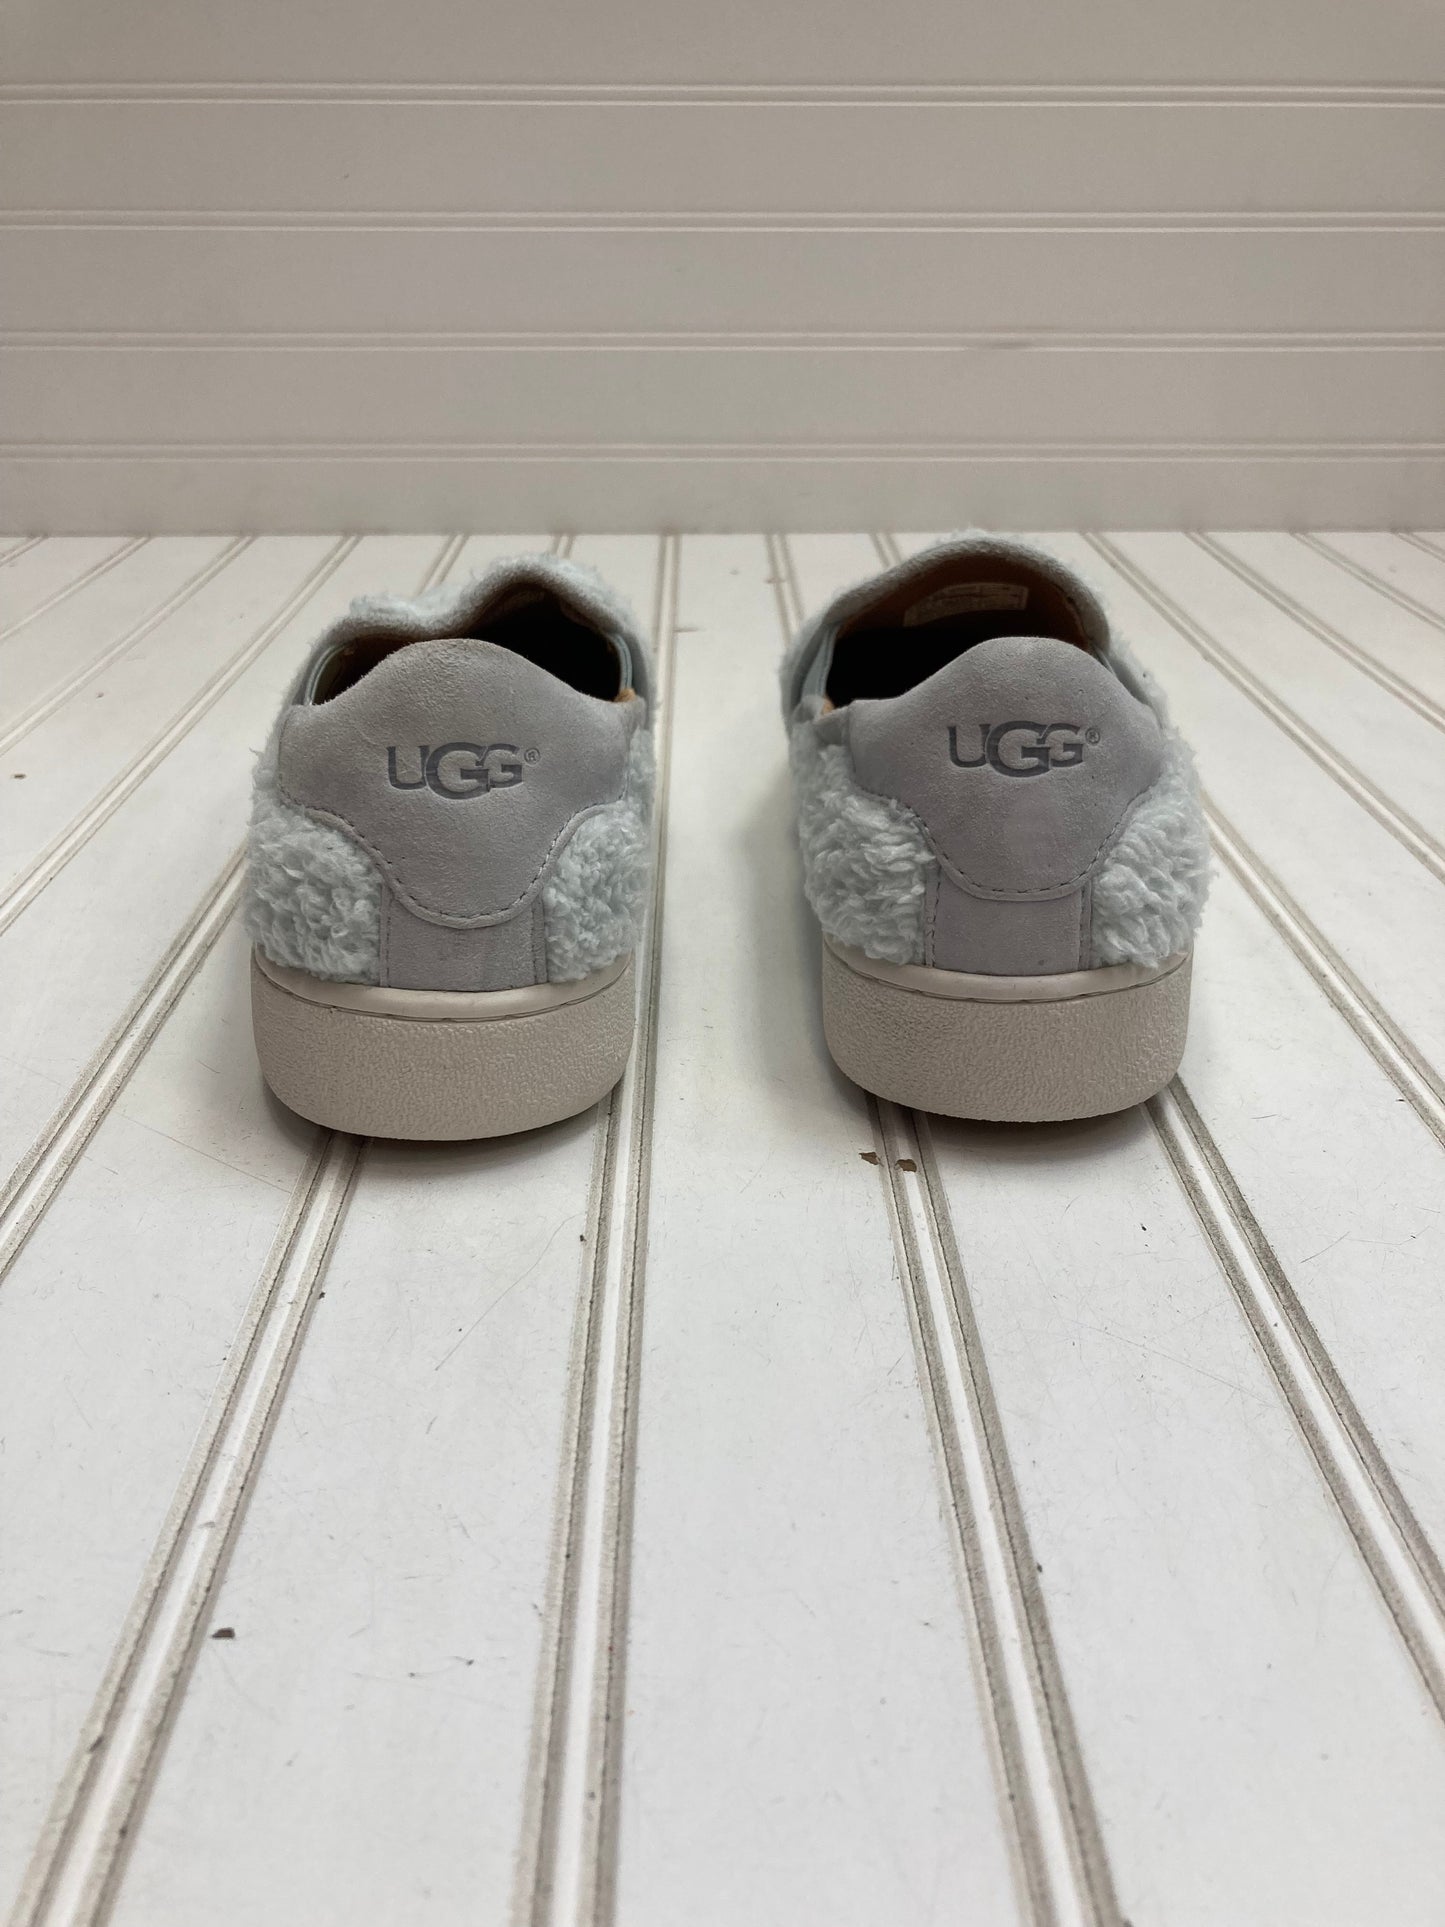 Blue Shoes Sneakers Ugg, Size 7.5